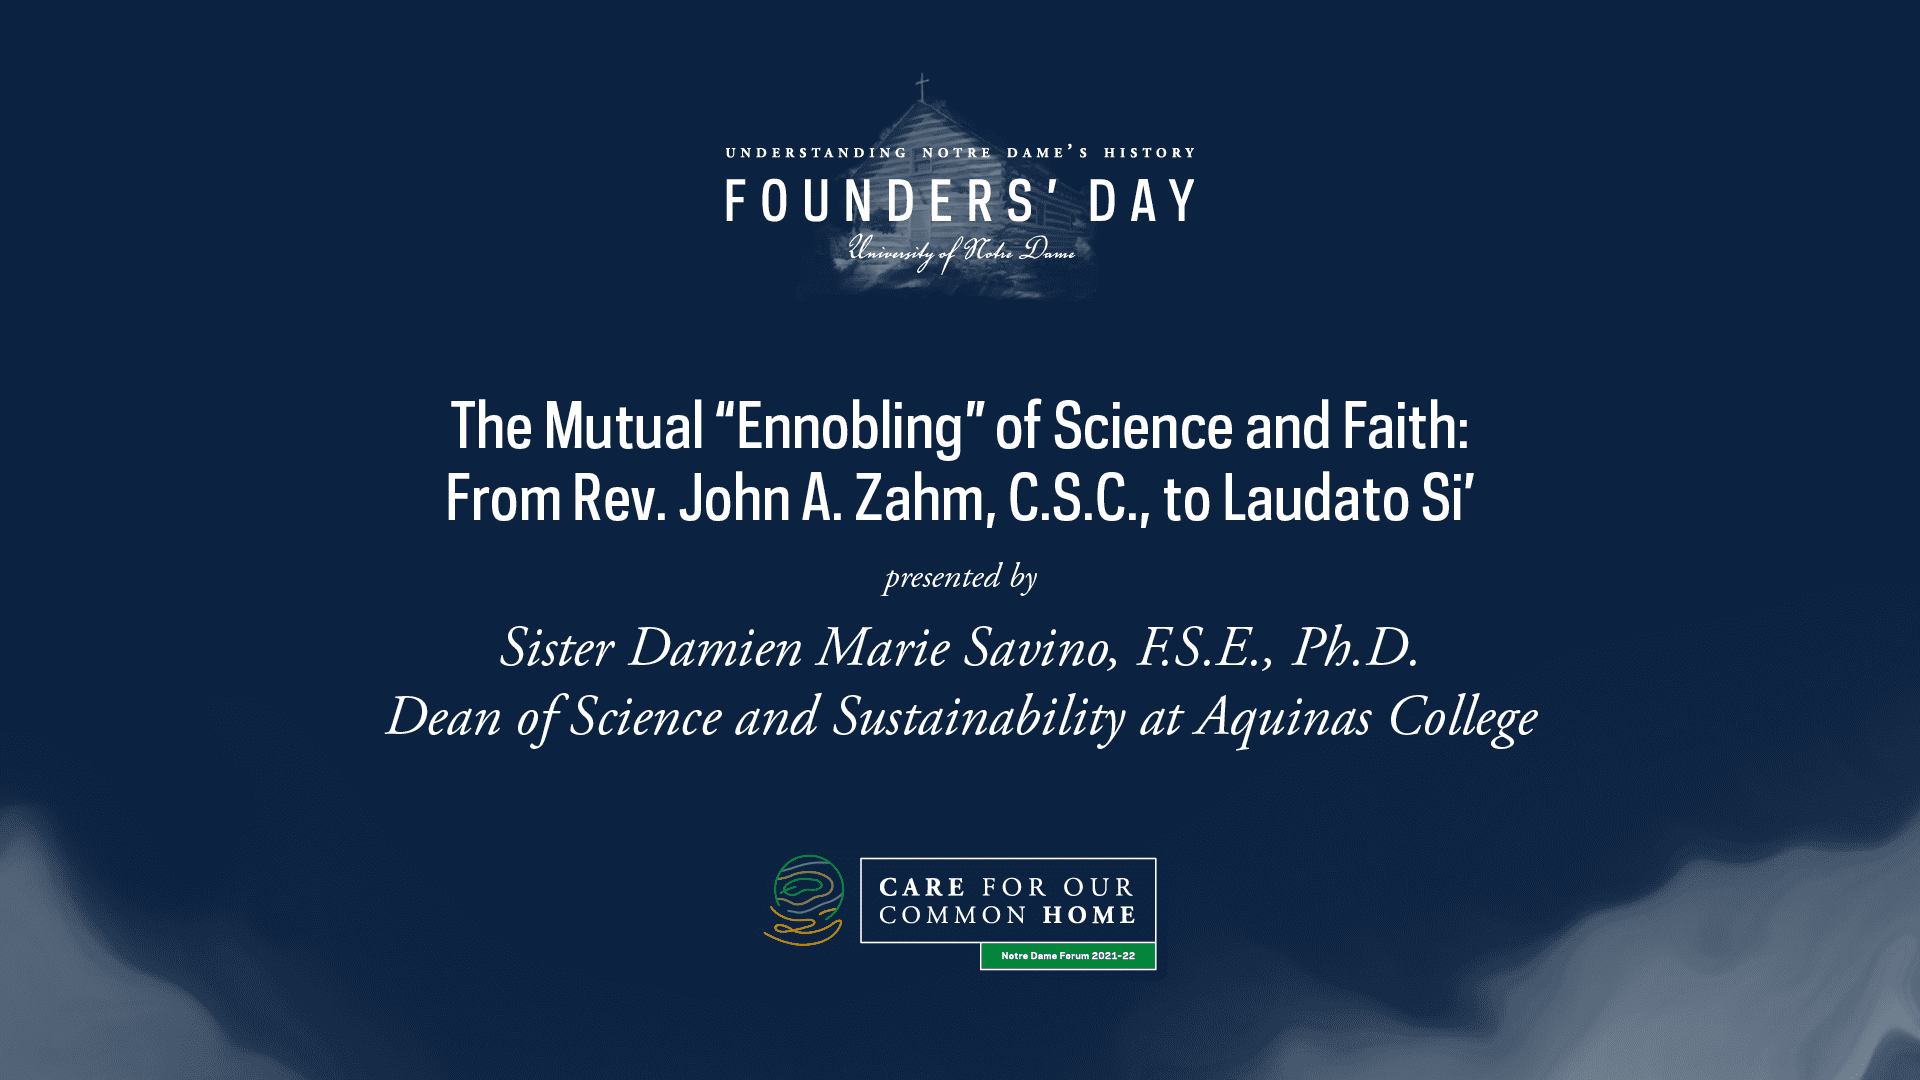 The Mutual “Ennobling” of Science and Faith: From Rev. John A. Zahm, C.S.C., to Laudato Si’